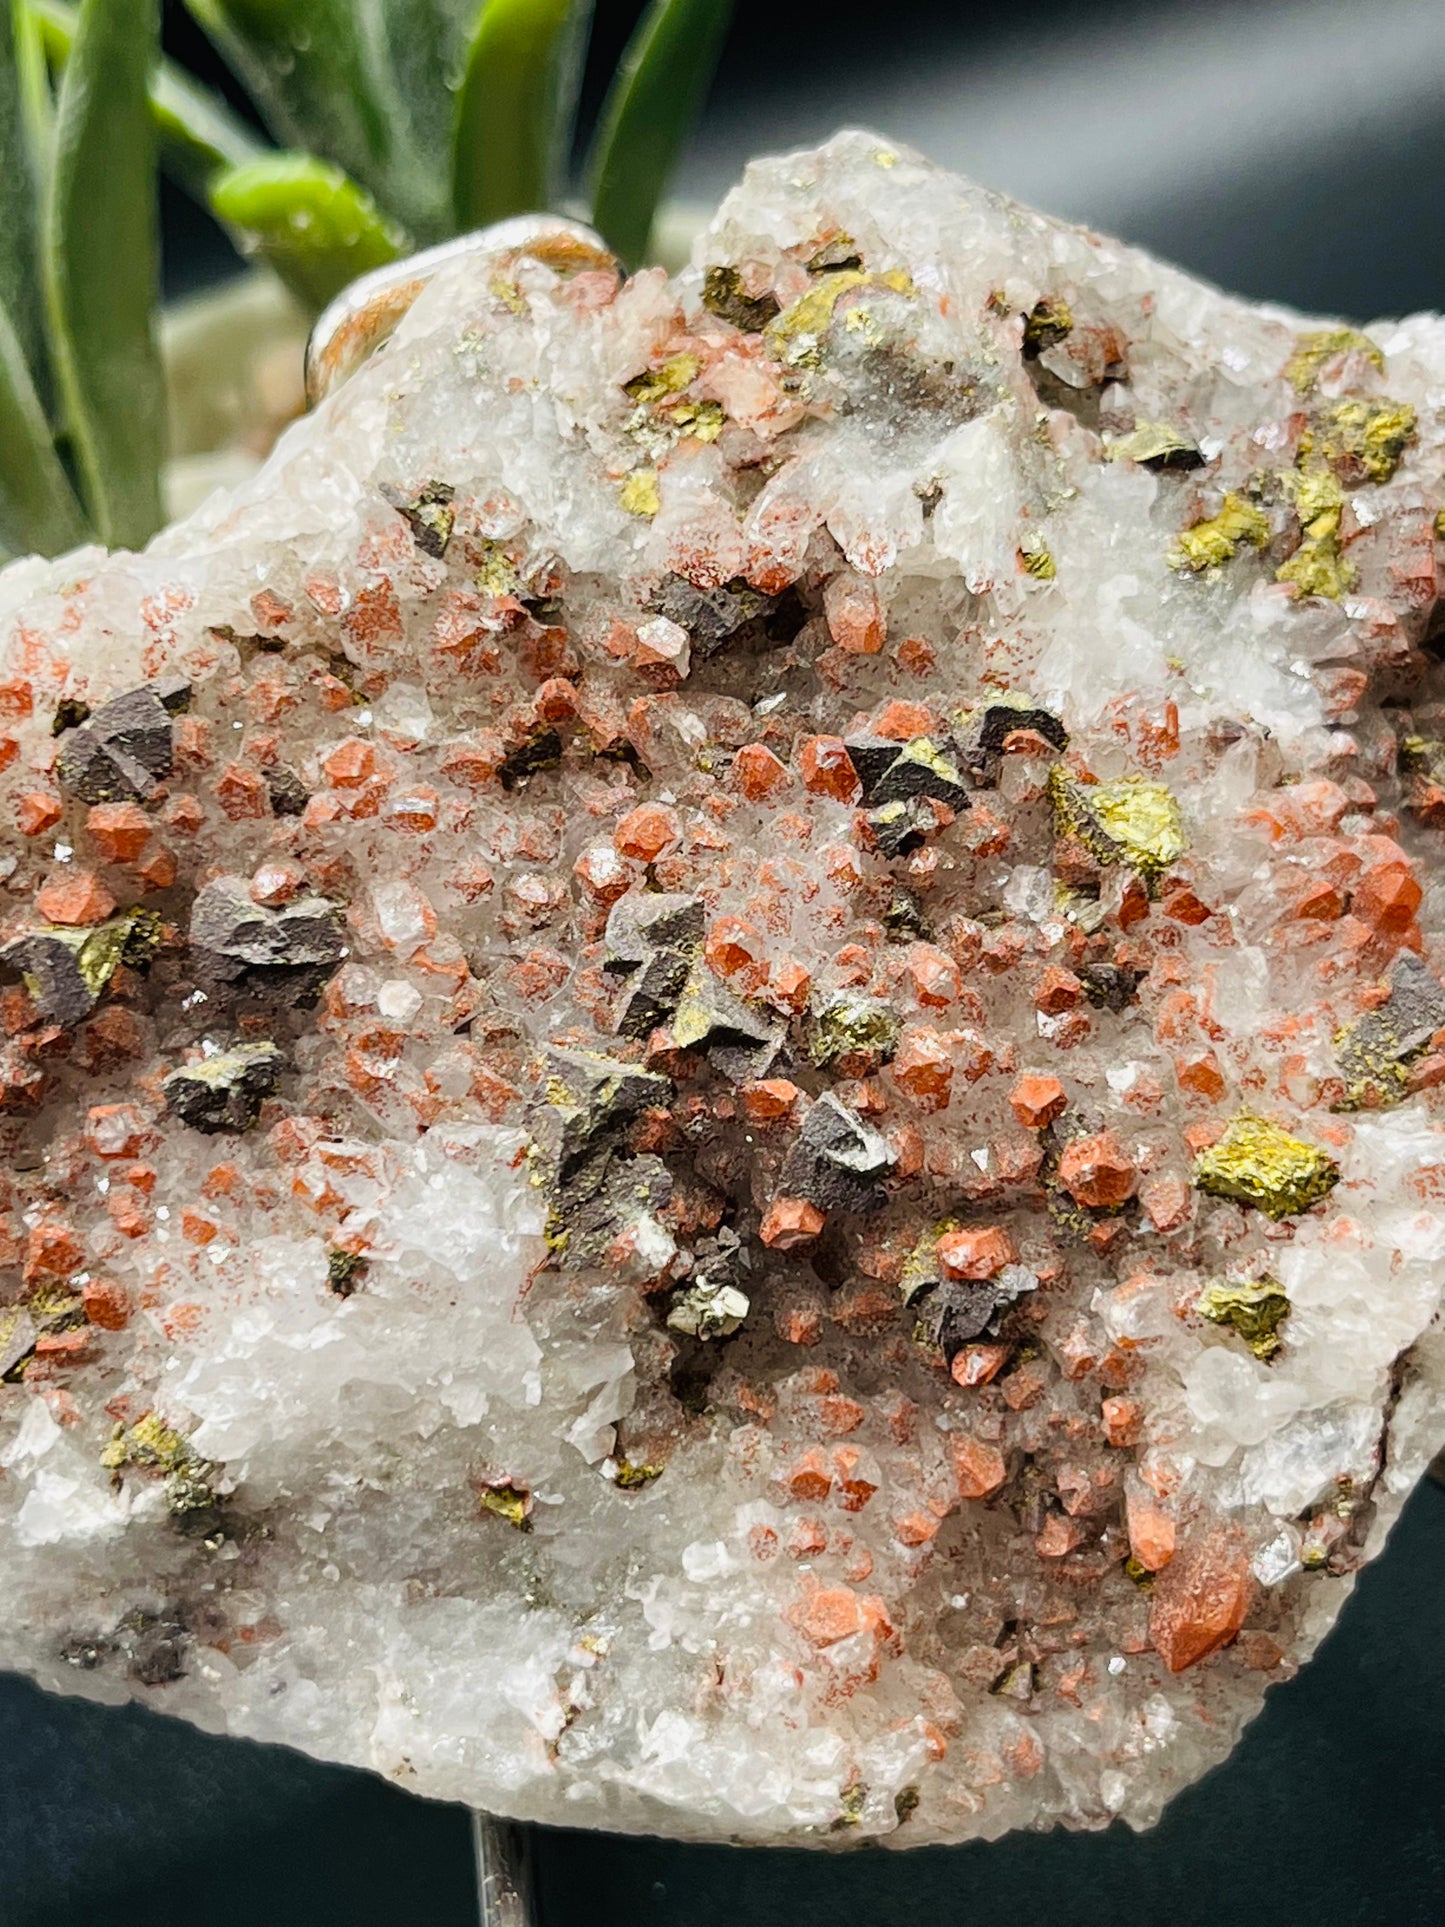 Red Quartz Cluster with pyrite